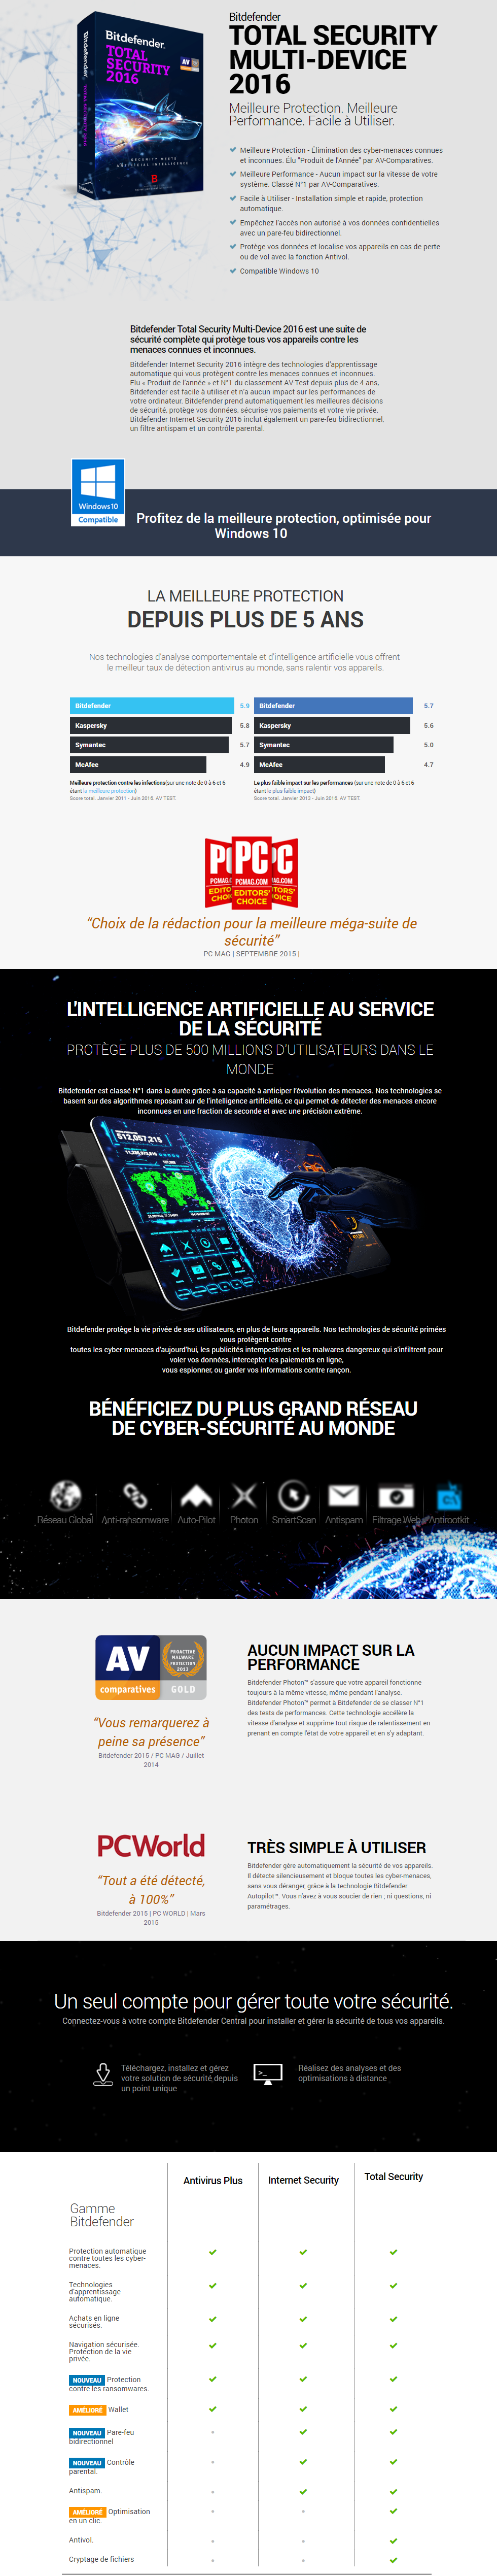 Acheter Bitdefender Total Security Multi-Device 2016 (Windows, Mac OS et Android) - 3 postes / 1 an Maroc